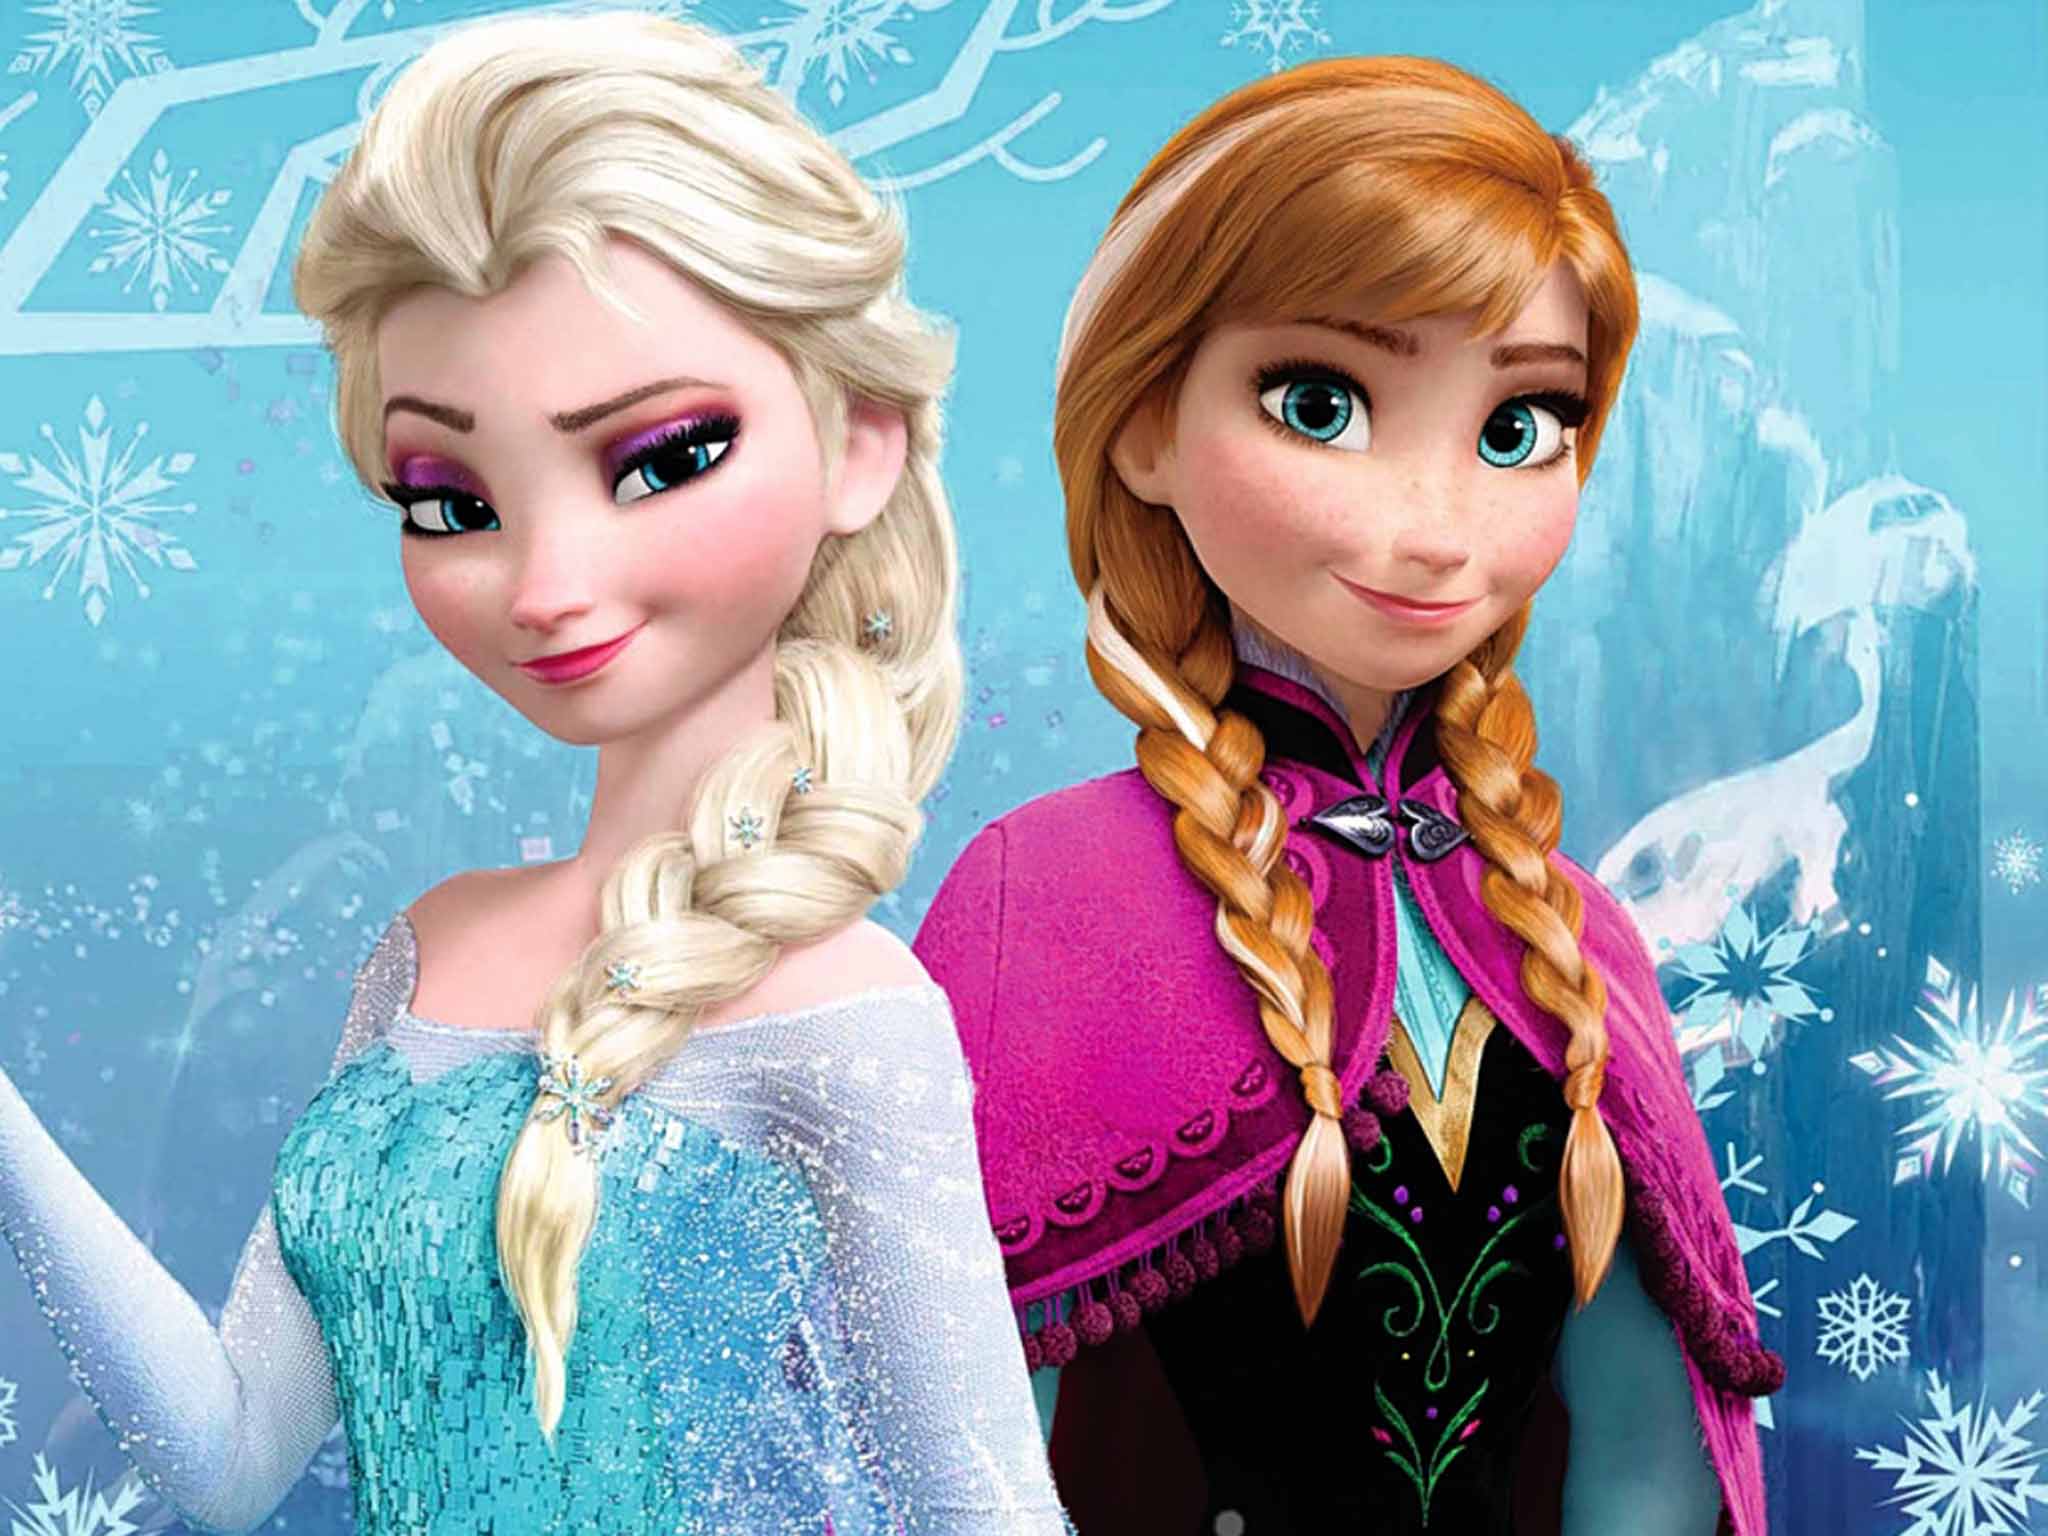 Elsa and Anna sing in English in Frozen, but they should really be singing in Norwegian